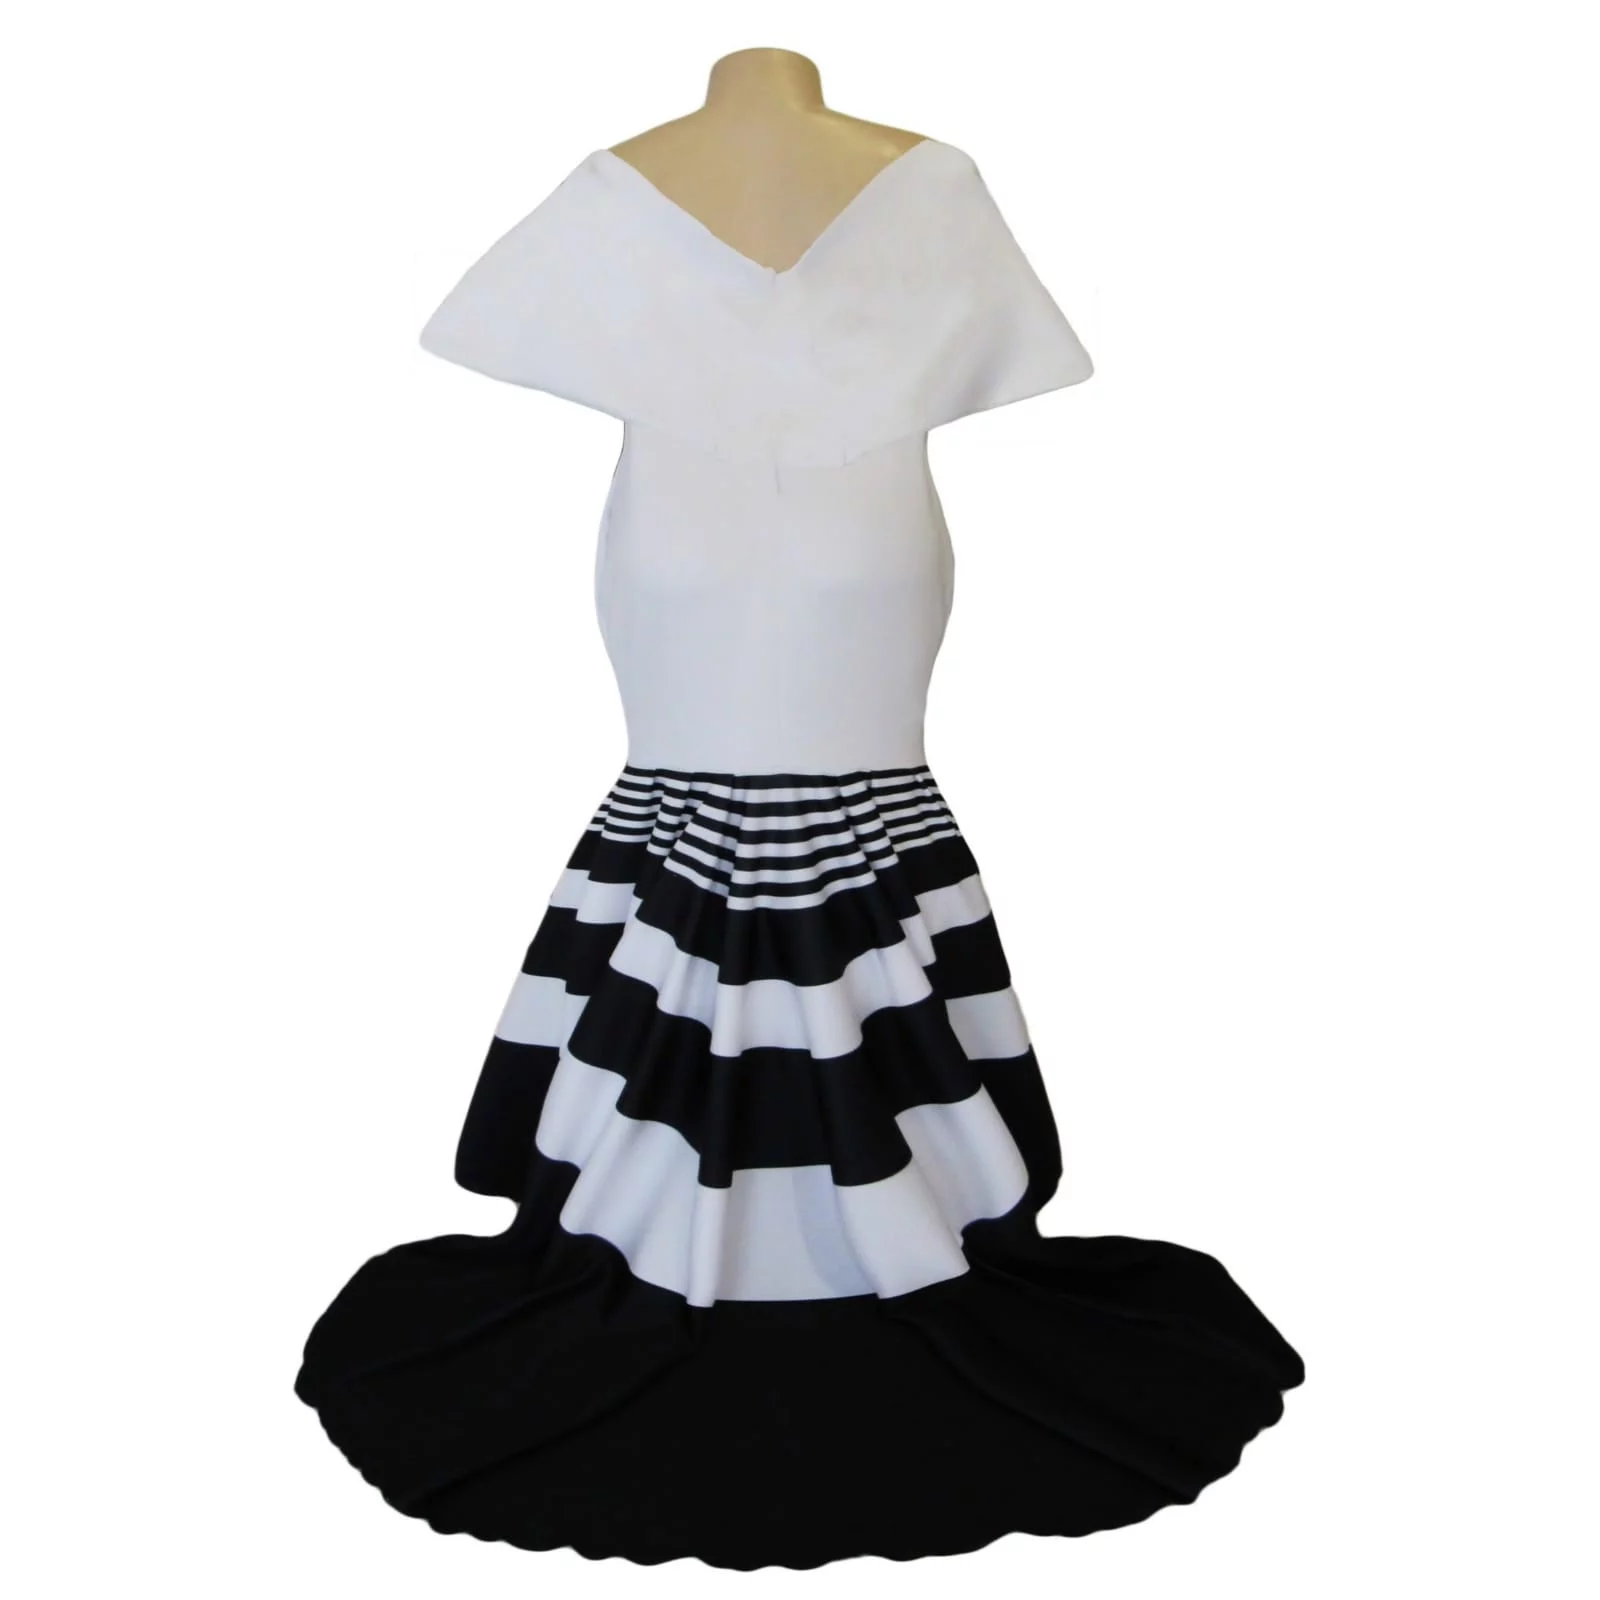 Black and white xhosa soft mermaid matric farewell dress 5 black and white xhosa soft mermaid off shoulder matric dress with a train